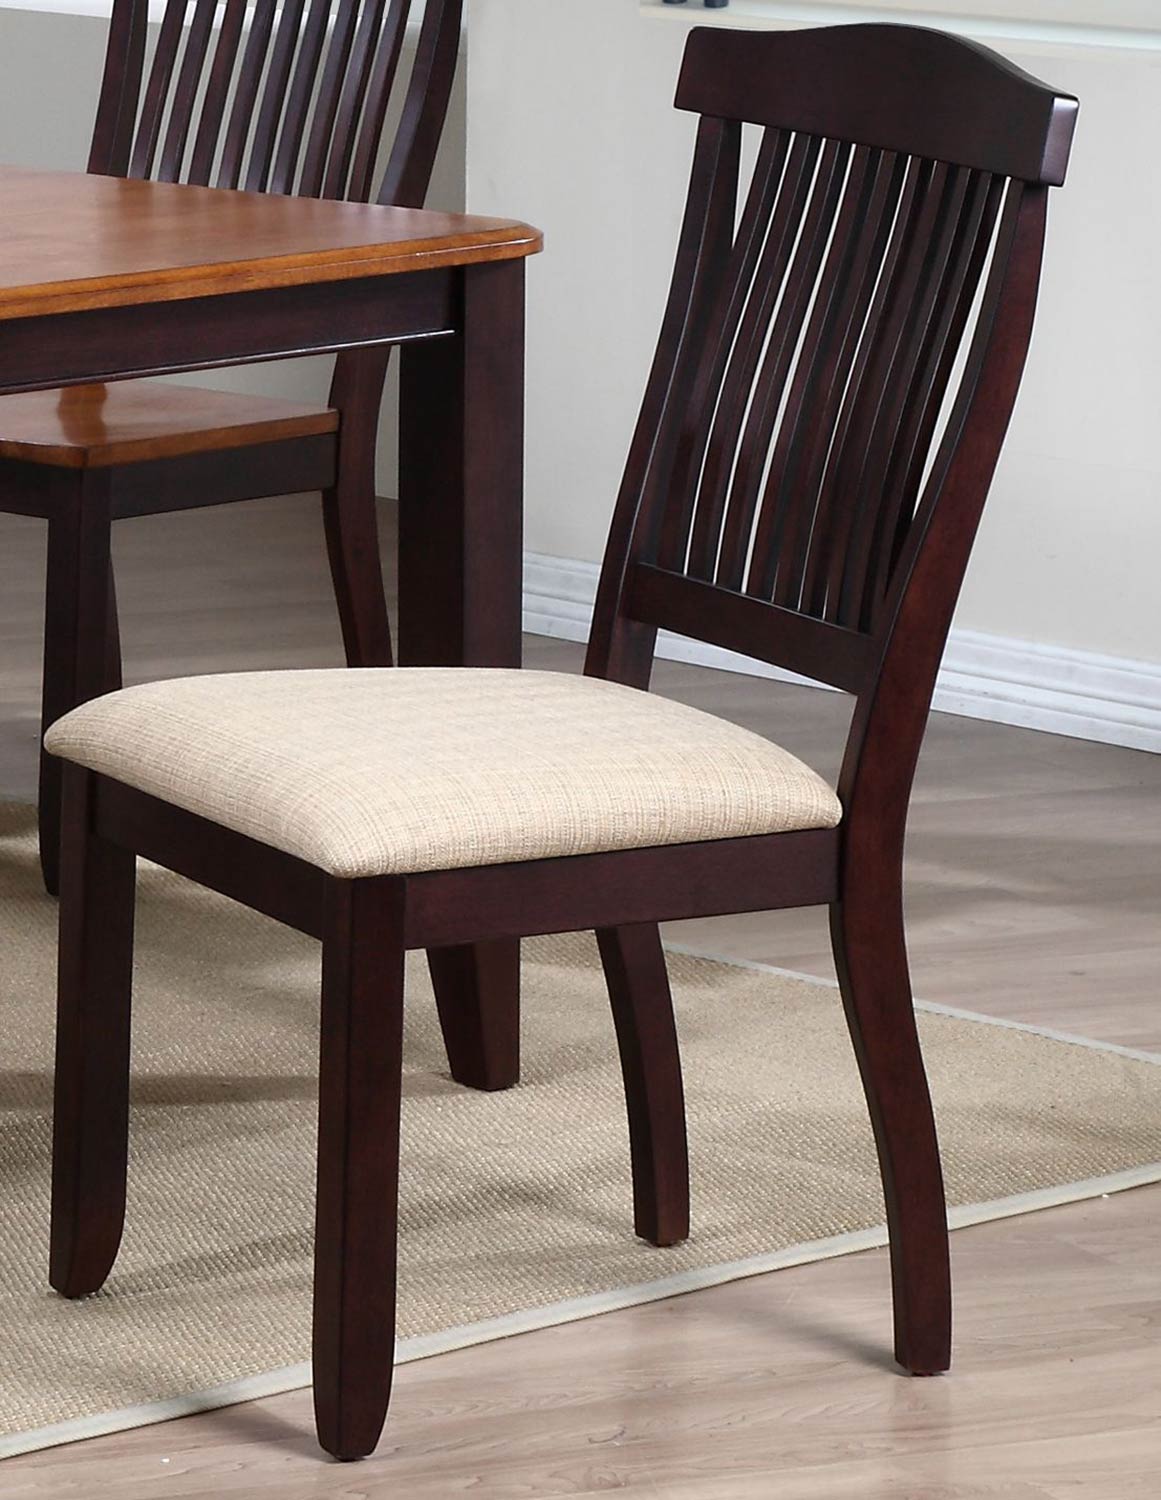 Iconic Furniture Open Slat Back Dining Chair with Upholstered seat - Mocha